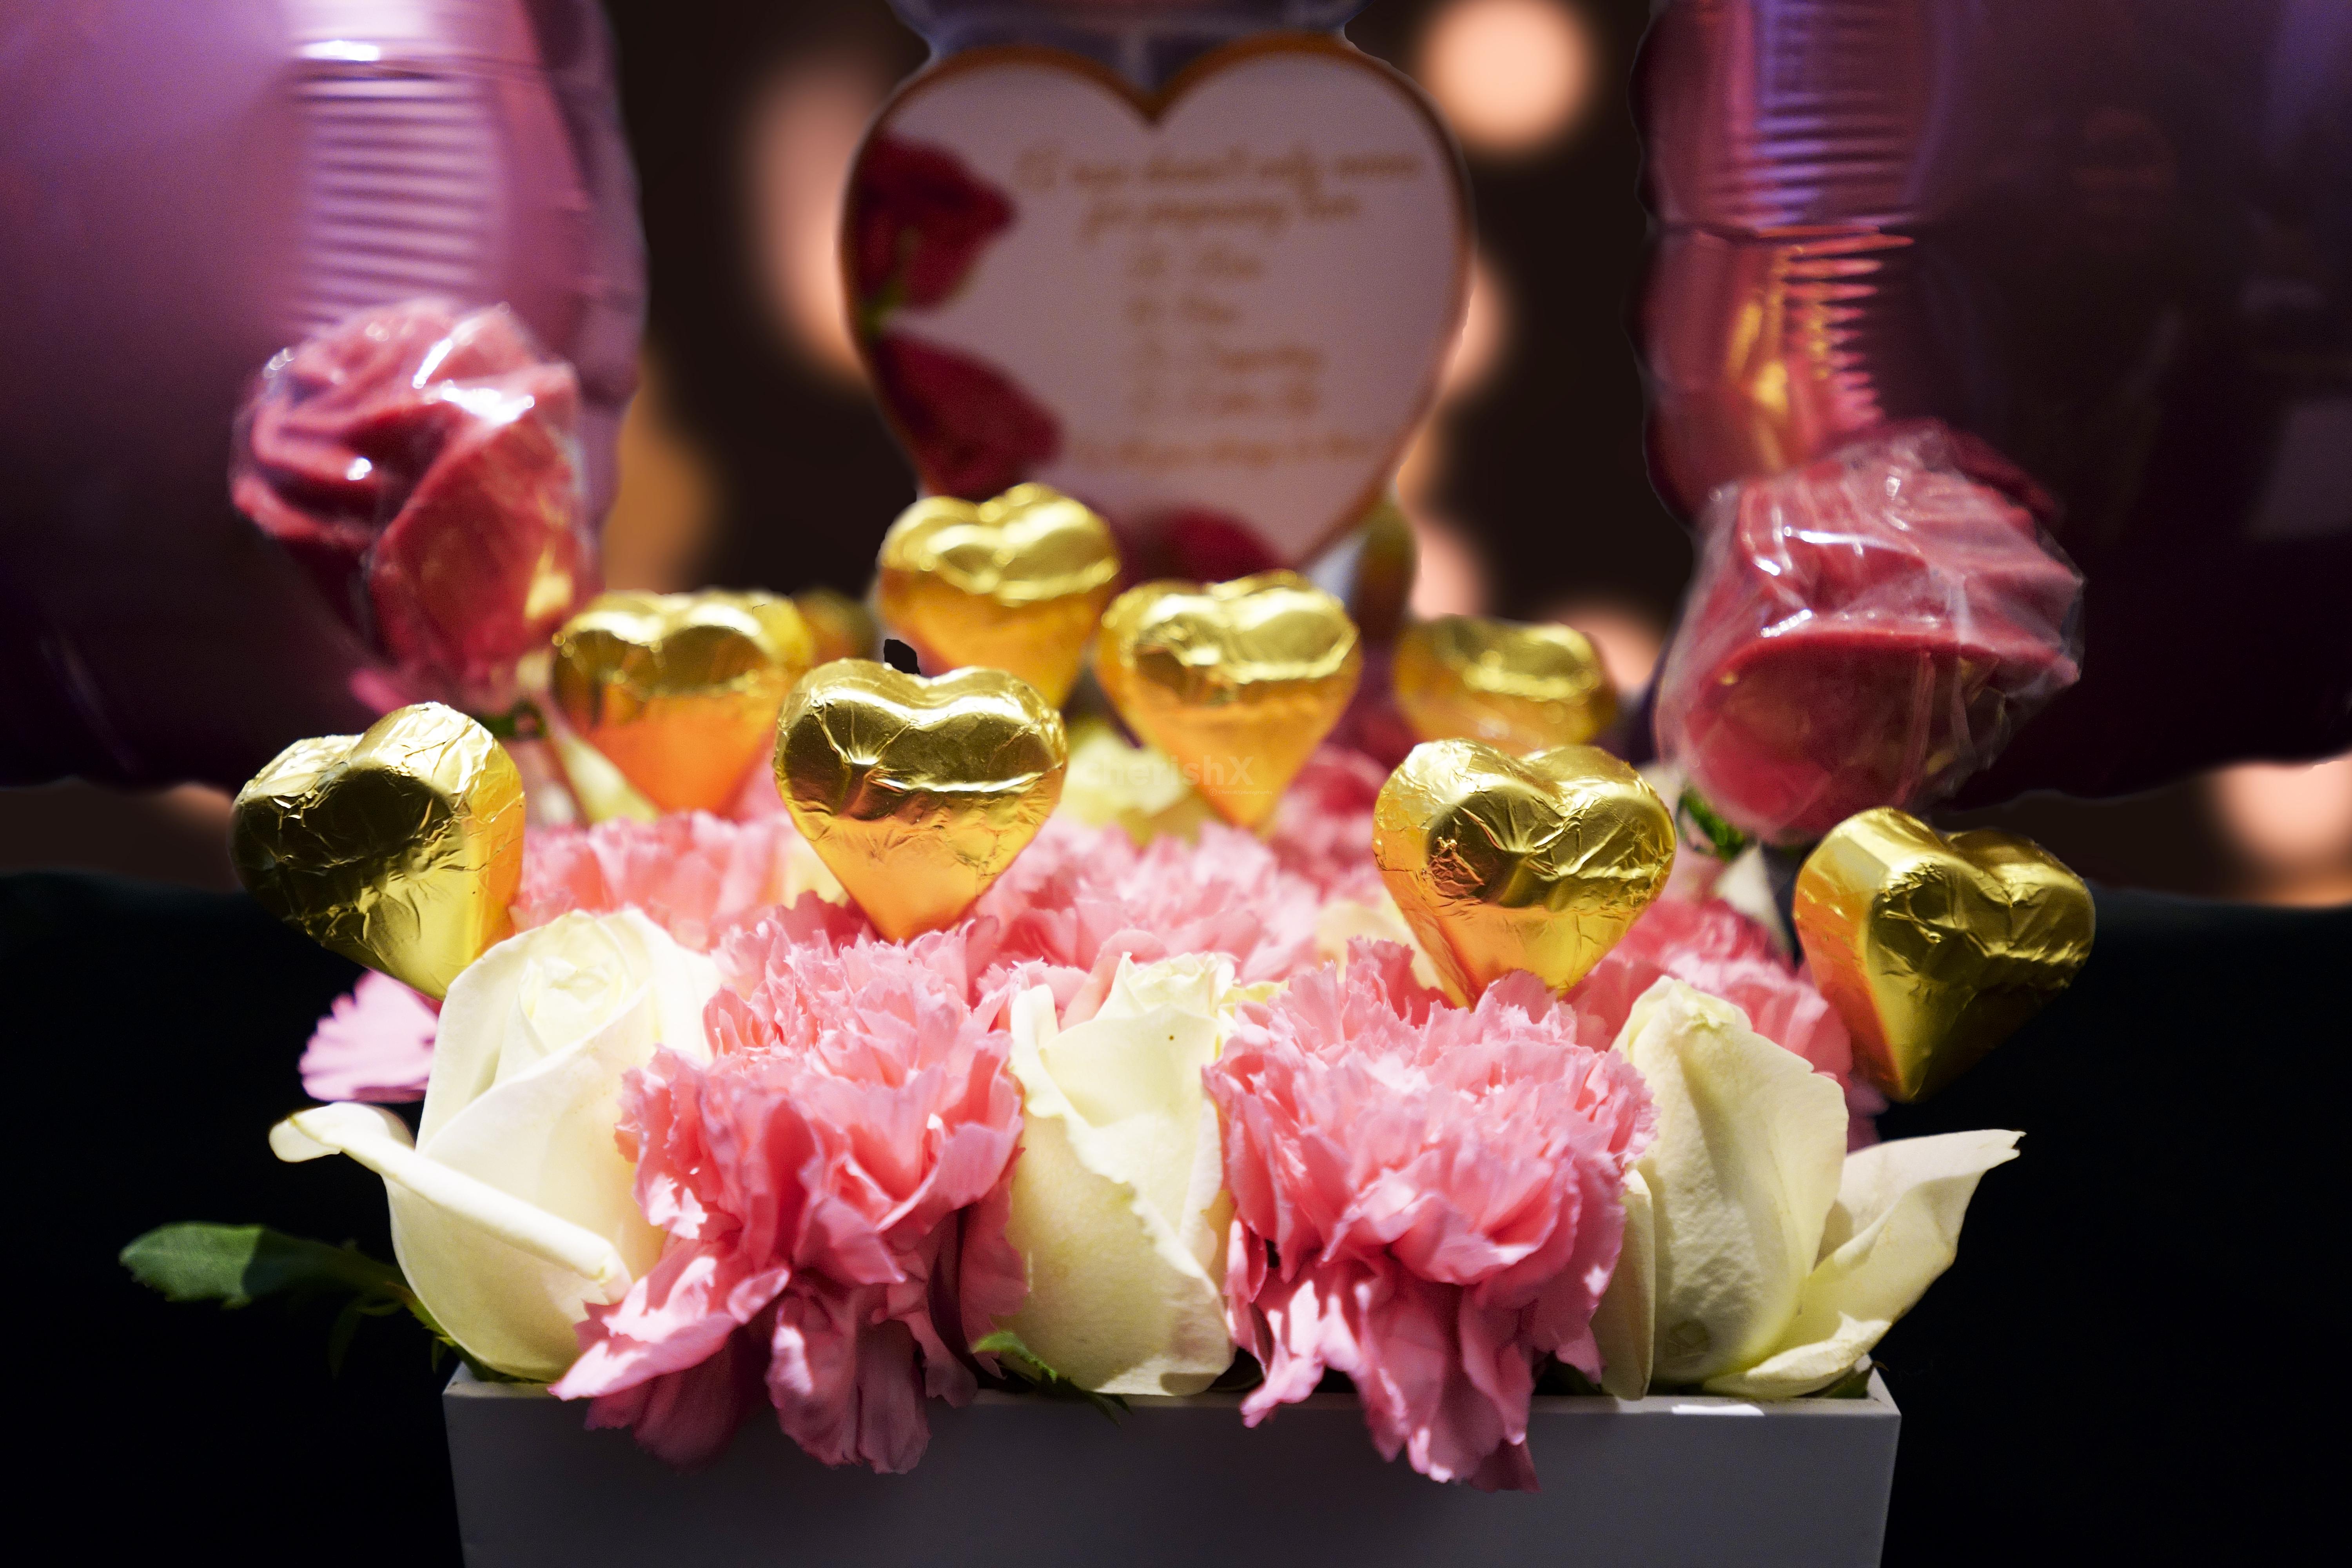 Surprise your partner with a delightful Pink Colored Rose Day Bucket offered by CherishX!